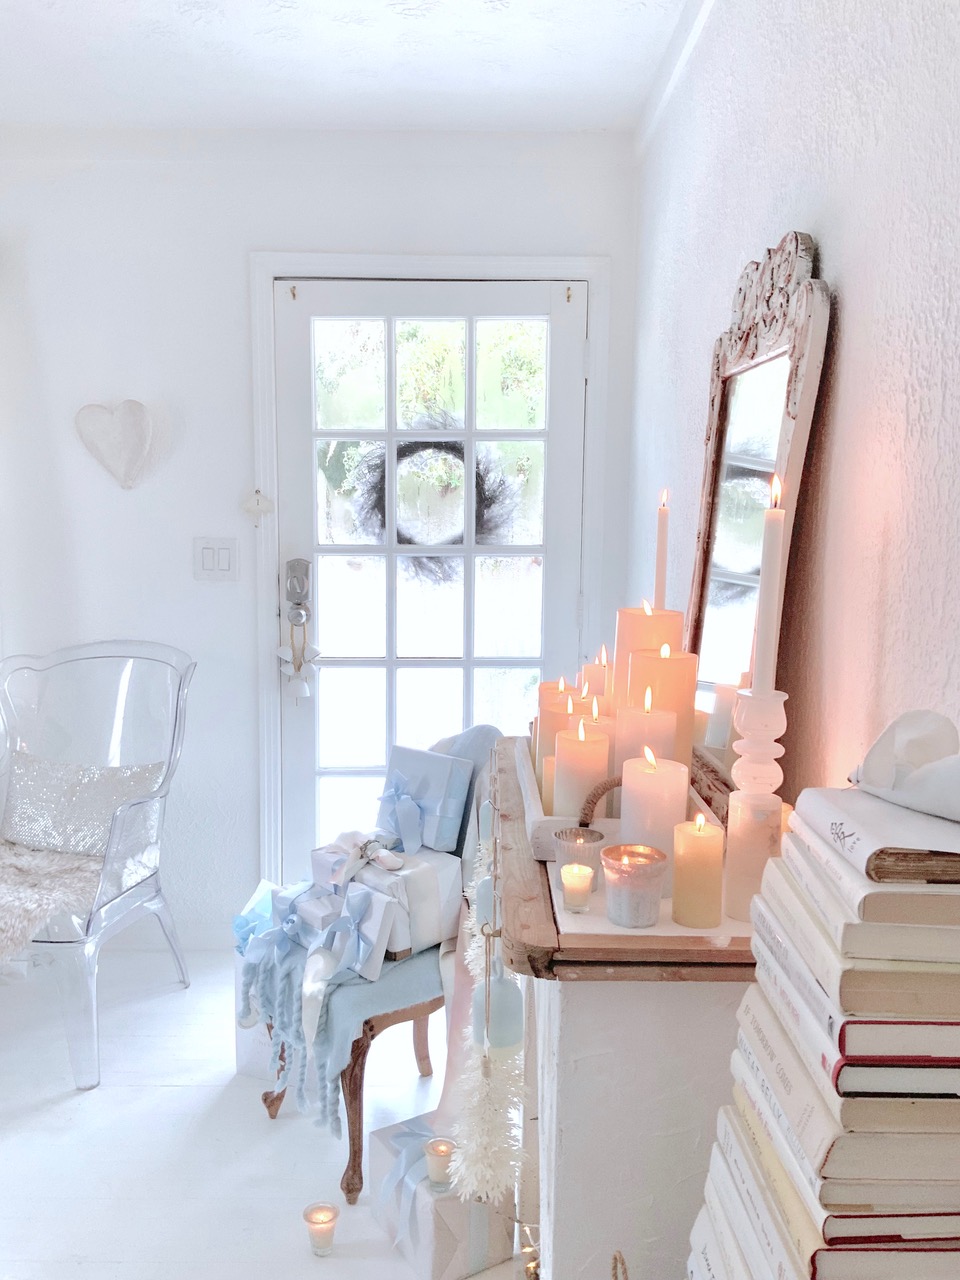 Fifi O'Neill's pastel and white Christmas ethereal style in her own home. #pastelchristmas #whitechristmasdecor